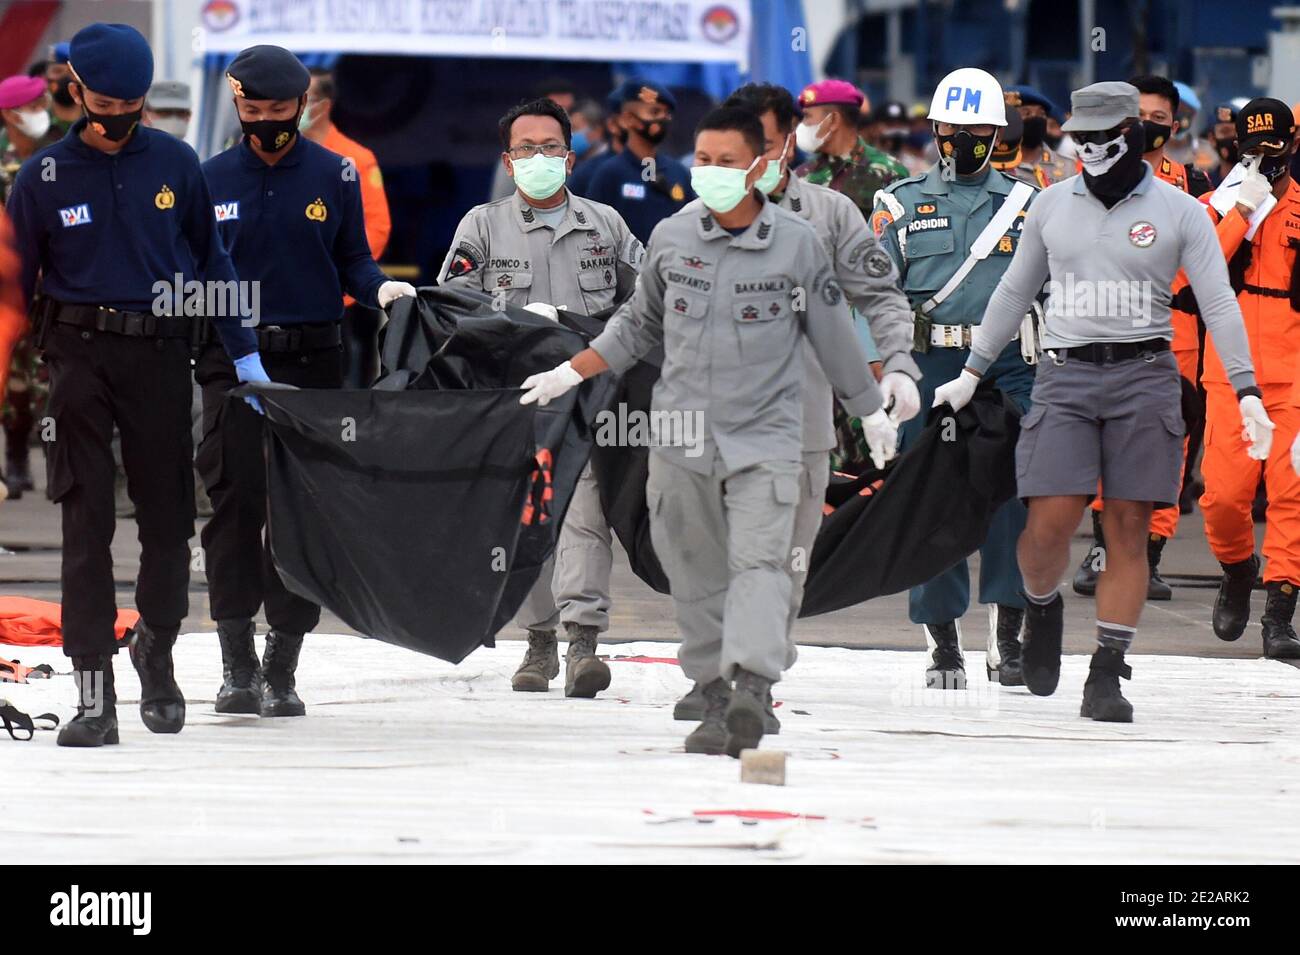 Jakarta, Indonesia. 13th Jan, 2021. Members of the Indonesian Search and Rescue carry body parts of passengers aboard Sriwijaya Air flight SJ-182 at Tanjung Priok Port, Jakarta, Indonesia, Jan. 13, 2021. On Jan. 9, a Sriwijaya Air Boeing 737-500 plane with 62 people aboard lost contact minutes after takeoff and crashed into waters off the coast of Indonesia's capital Jakarta. Credit: Agung Kuncahya B./Xinhua/Alamy Live News Stock Photo